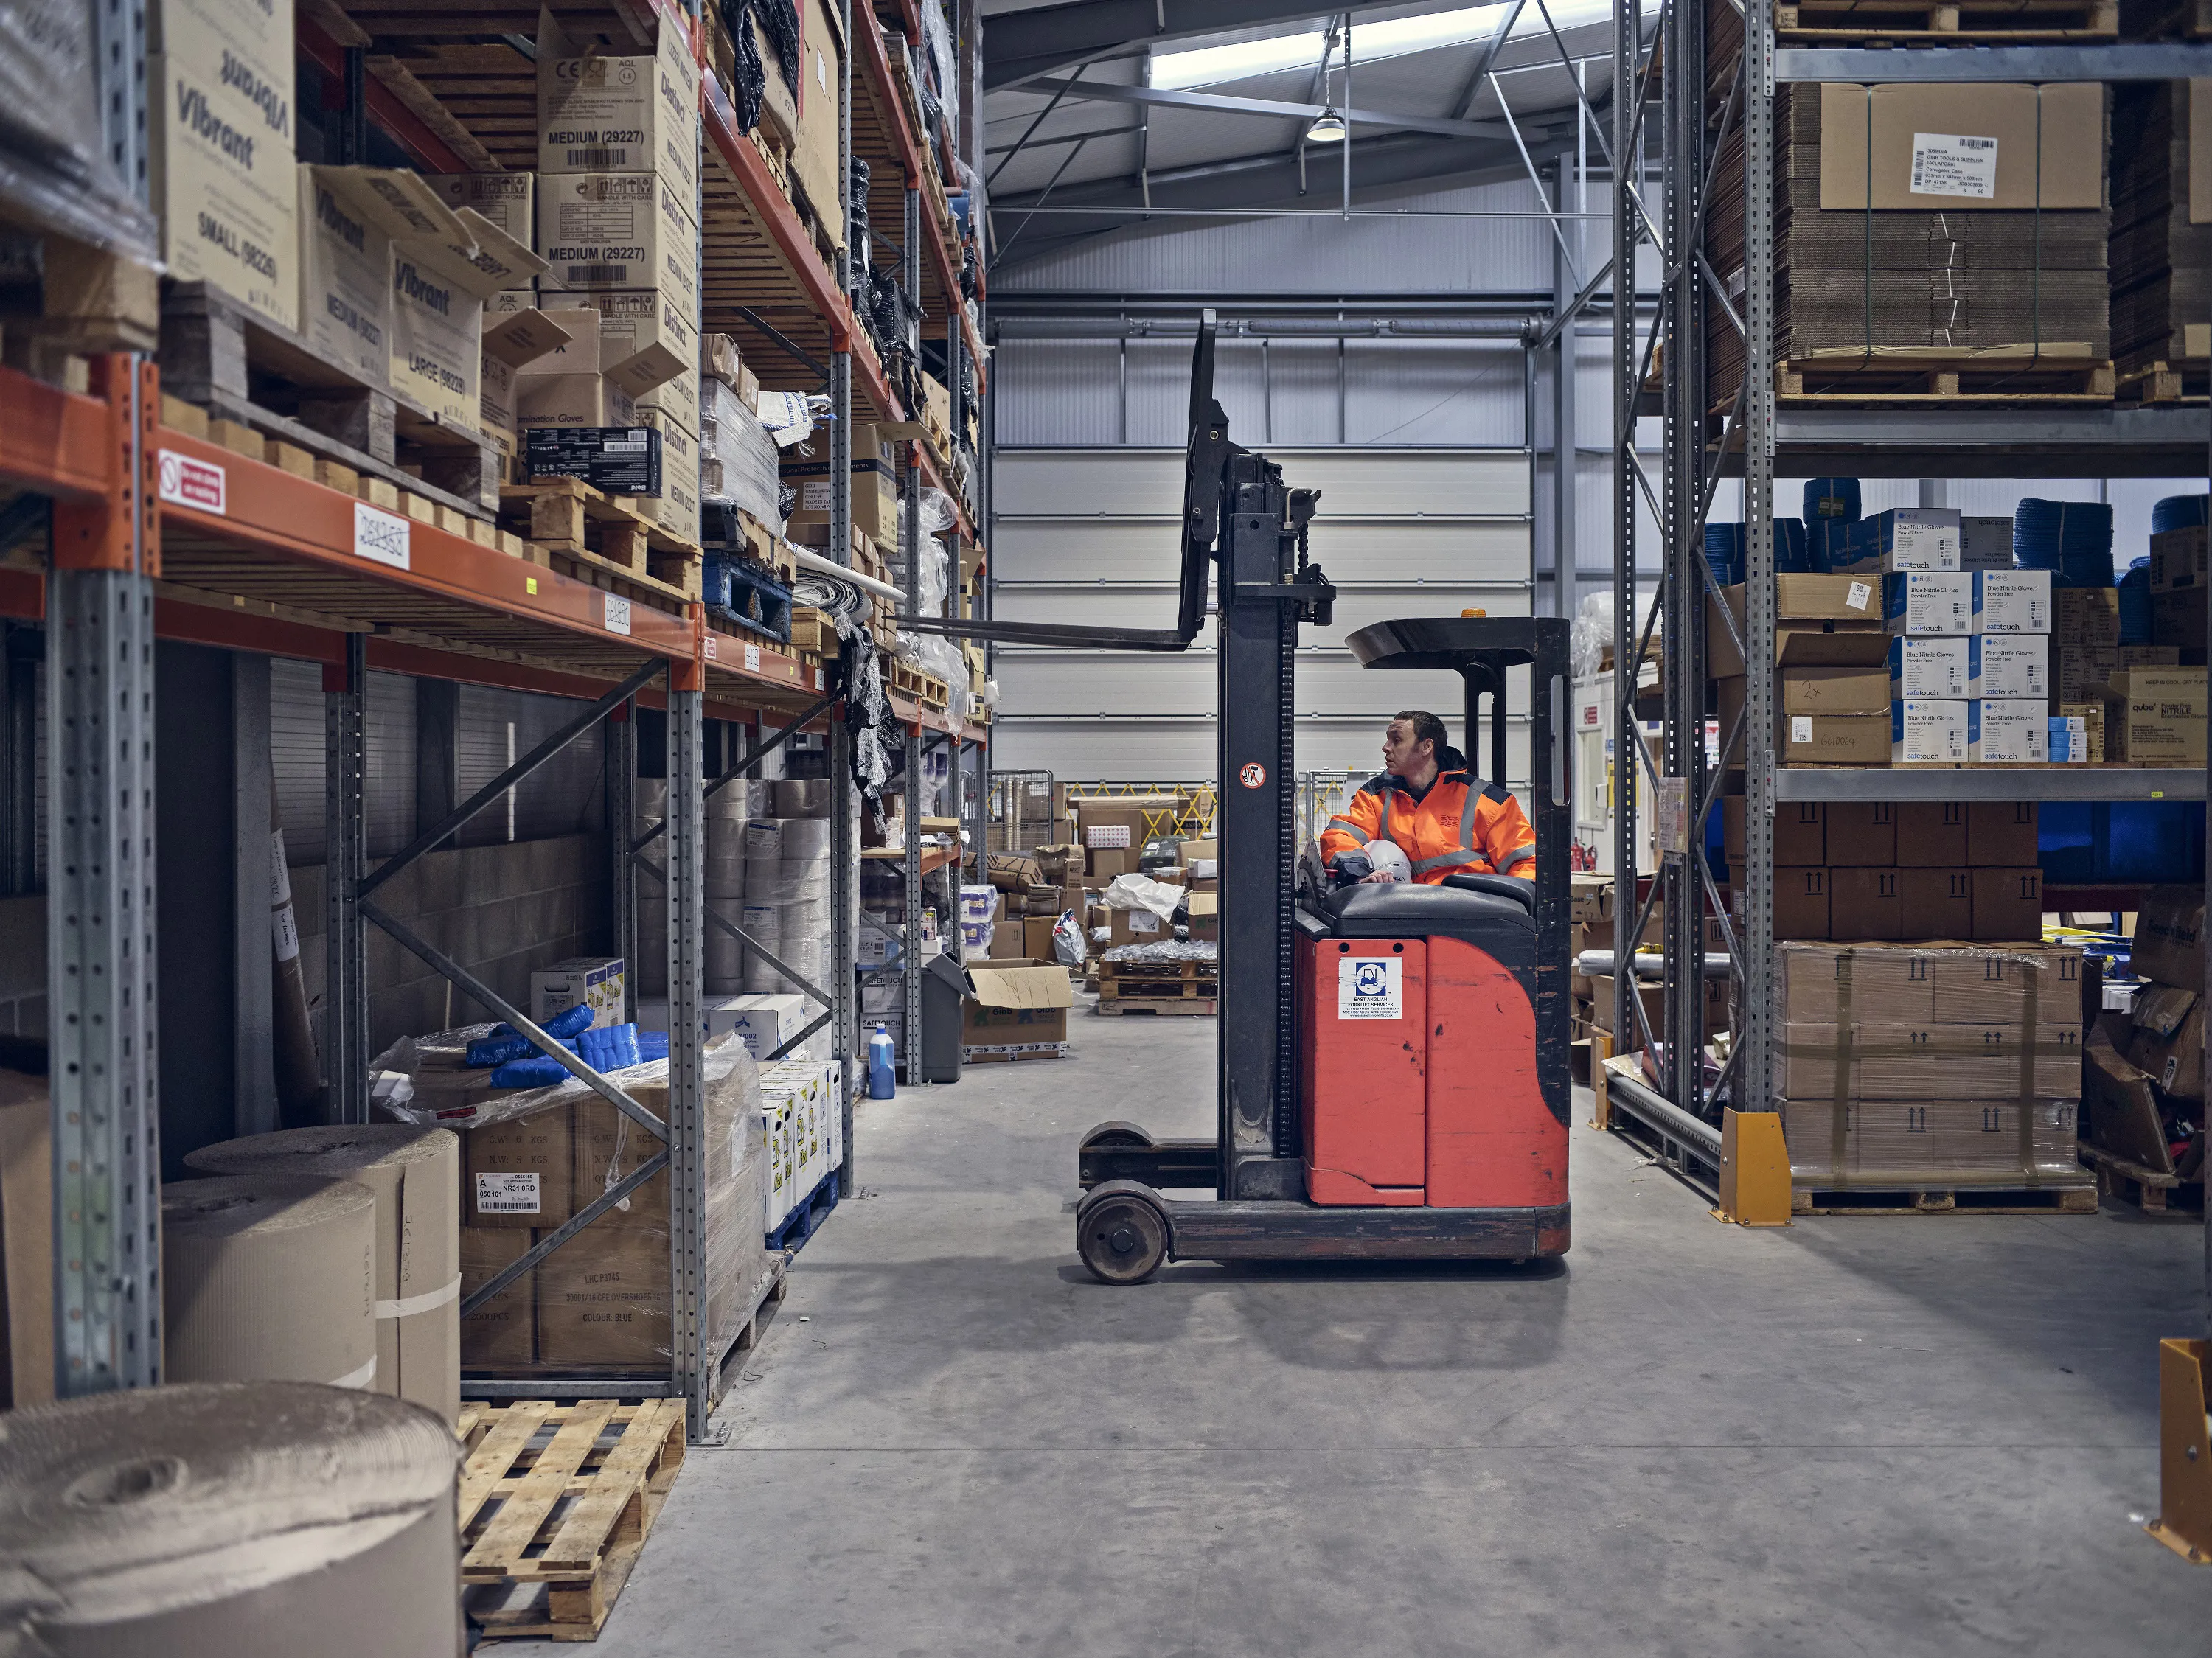 Warehouse employee in high vis jacket operating a fork lift